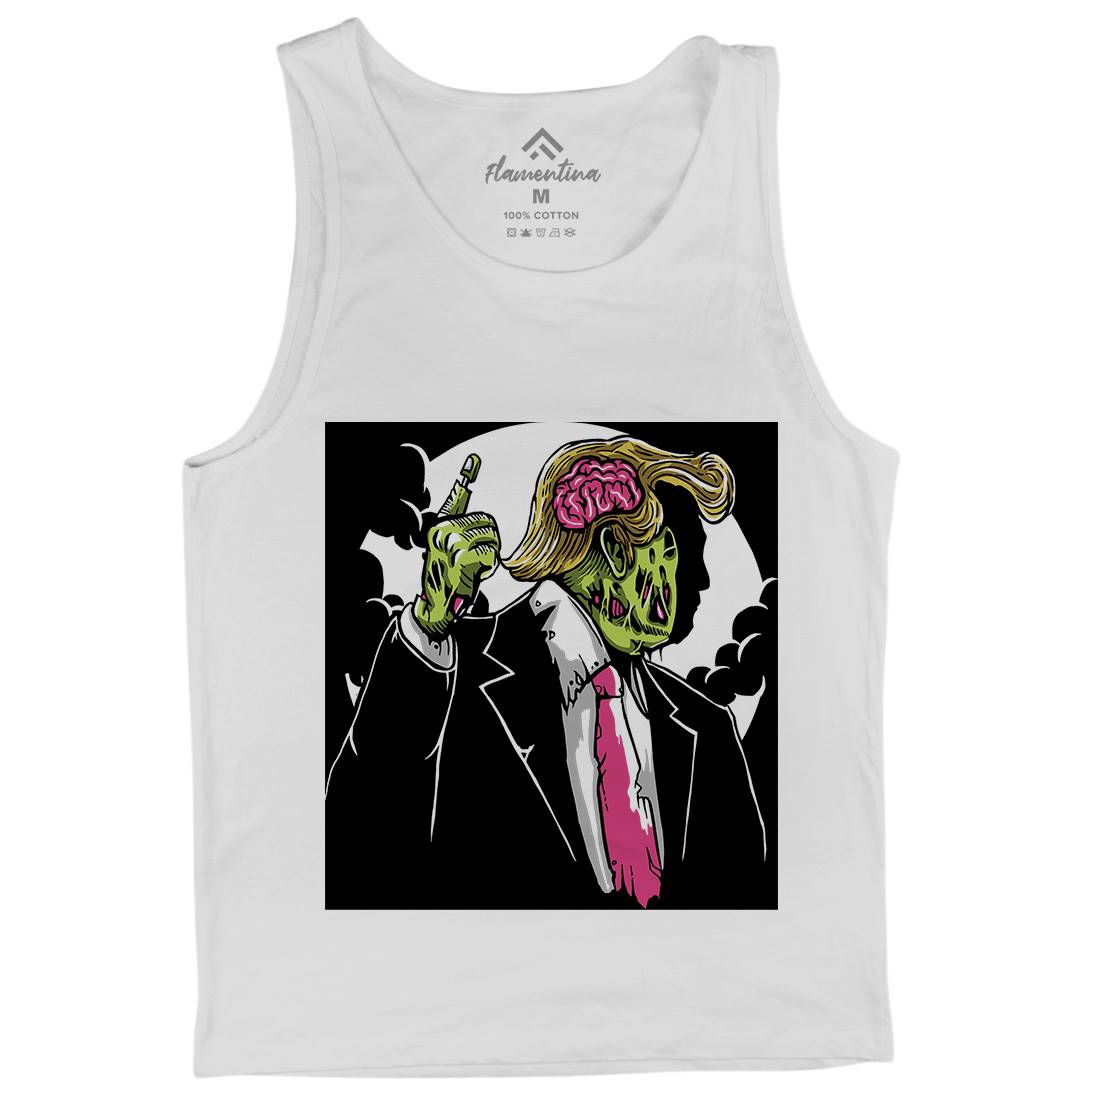 Make Zombie Great Again Mens Tank Top Vest Horror A554